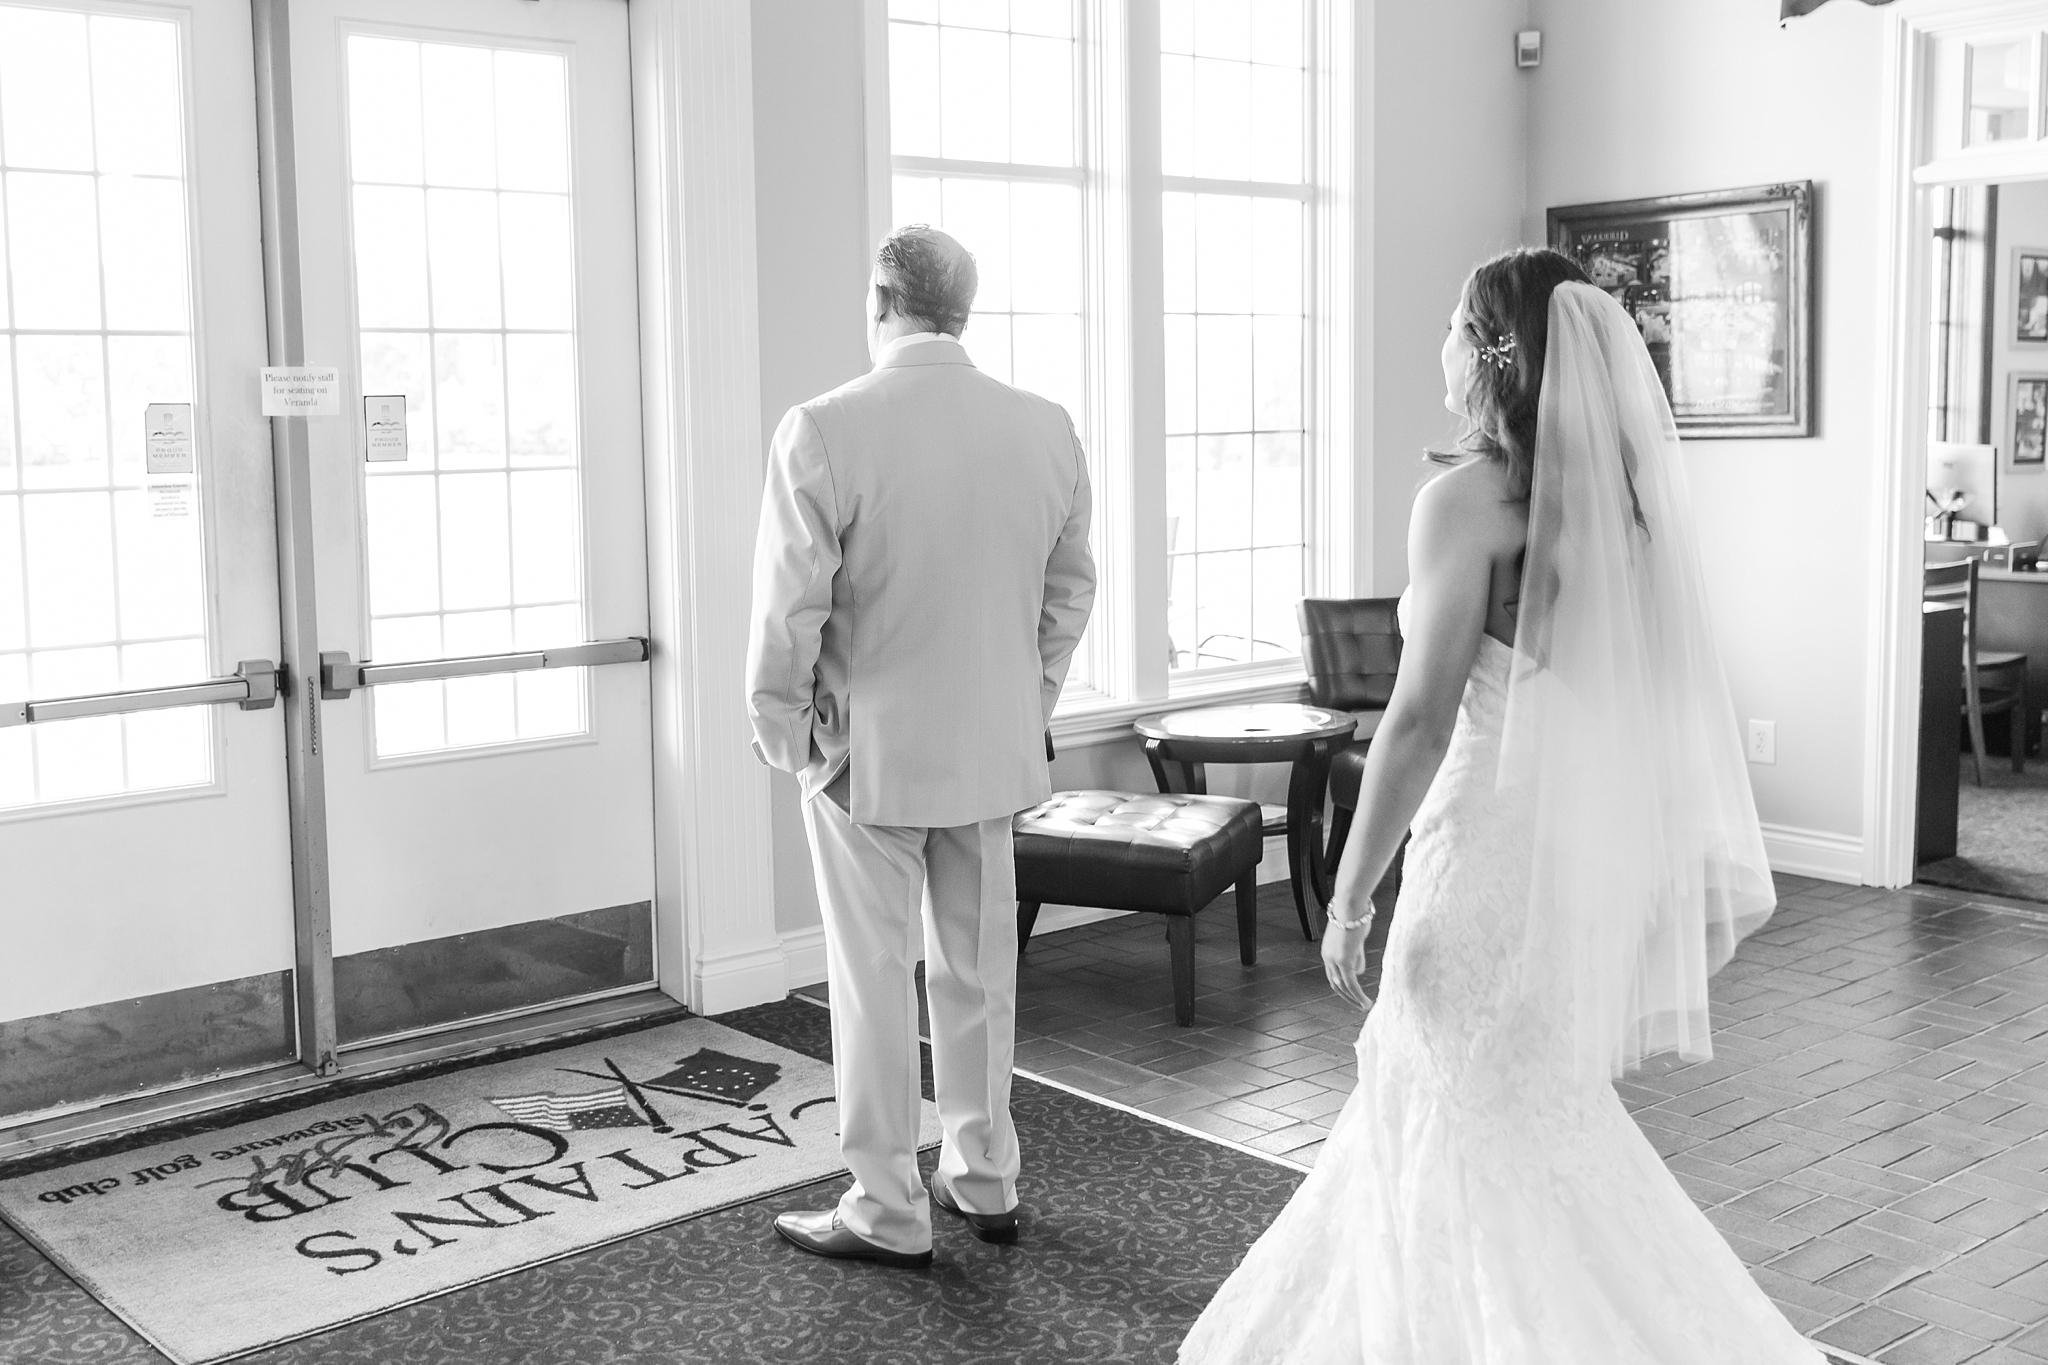 candid-timeless-wedding-photos-at-the-captains-club-in-grand-blanc-michigan-by-courtney-carolyn-photography_0025.jpg